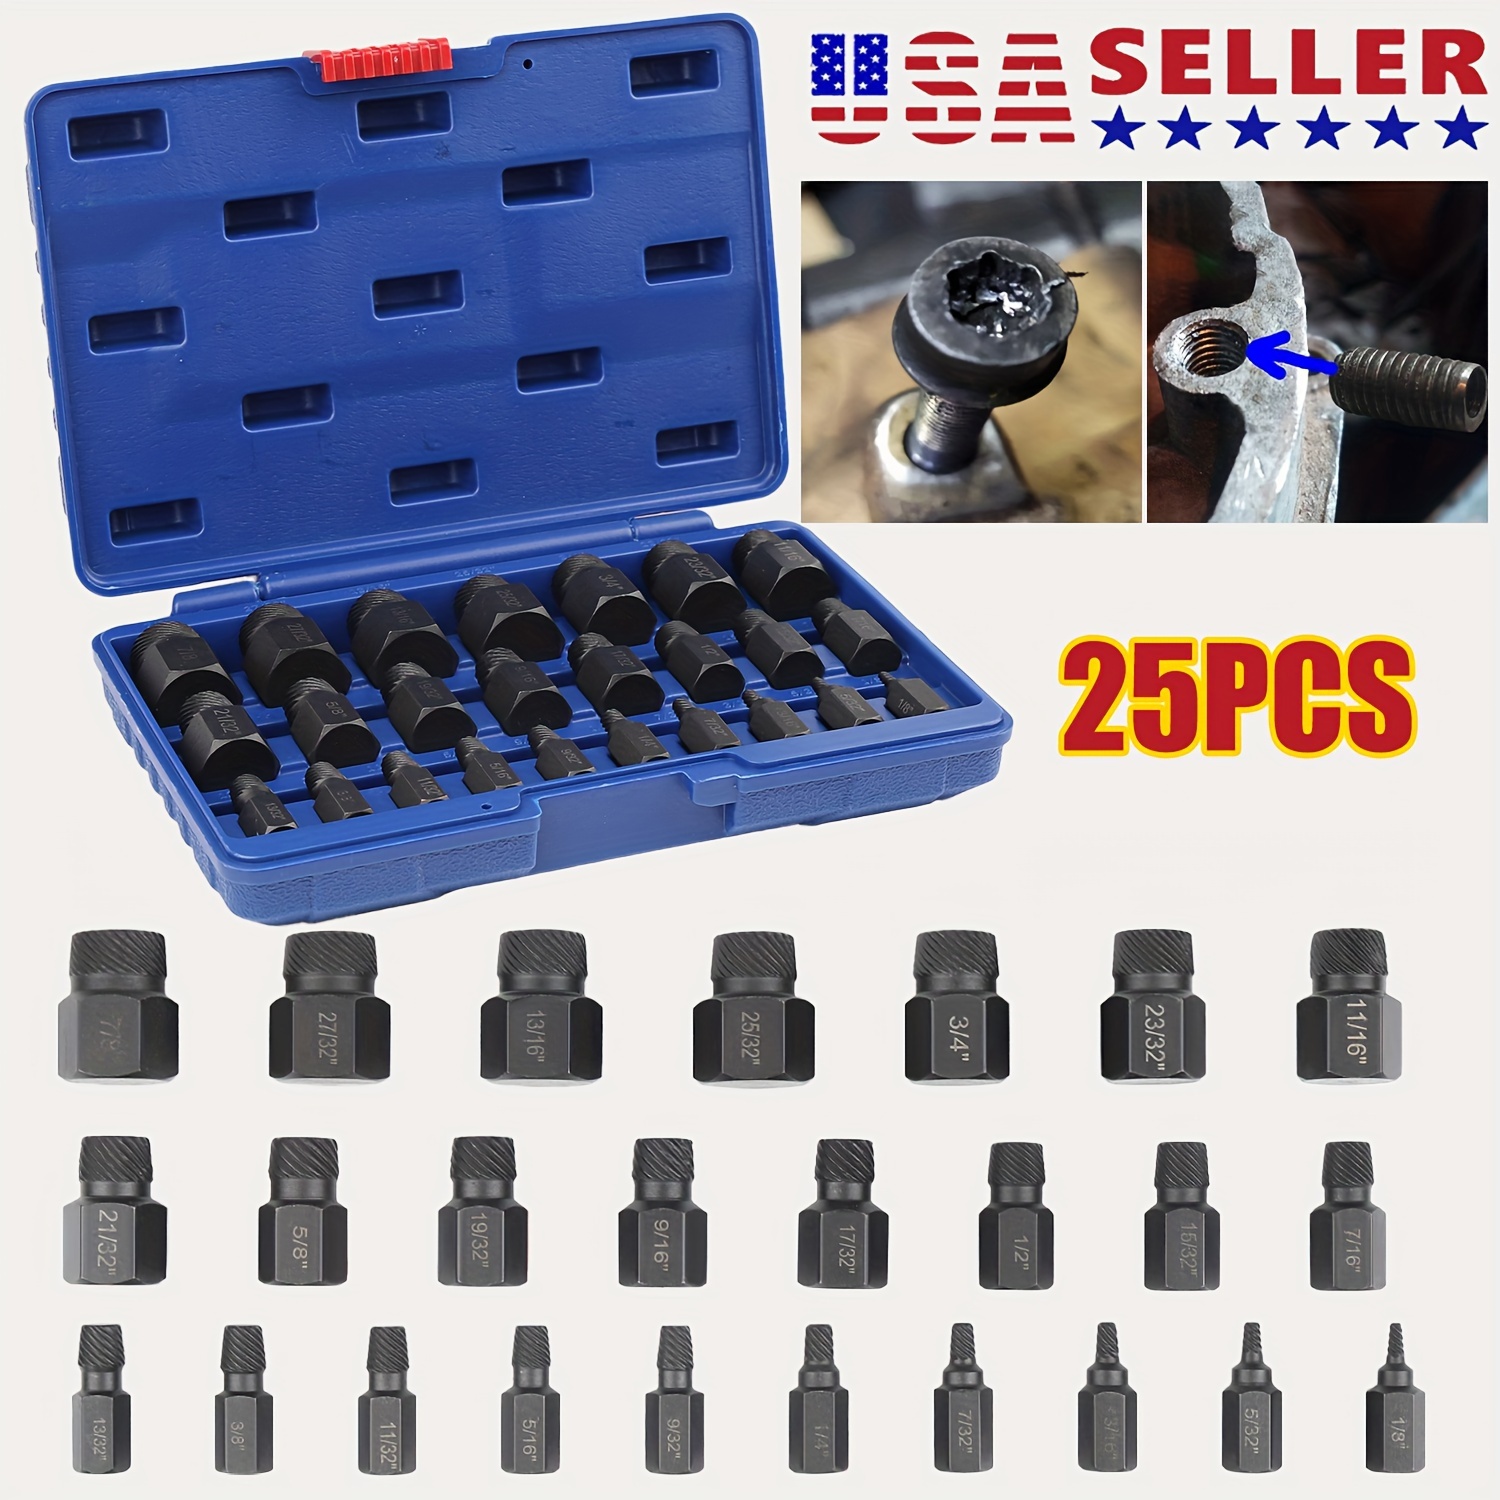 

25pcs Screw Extractor Set, Hex Head Multi-spline Easy Out Bolt Extractor Set, Removing Broken Screws, Bolts, Nuts, Studs, Fittings